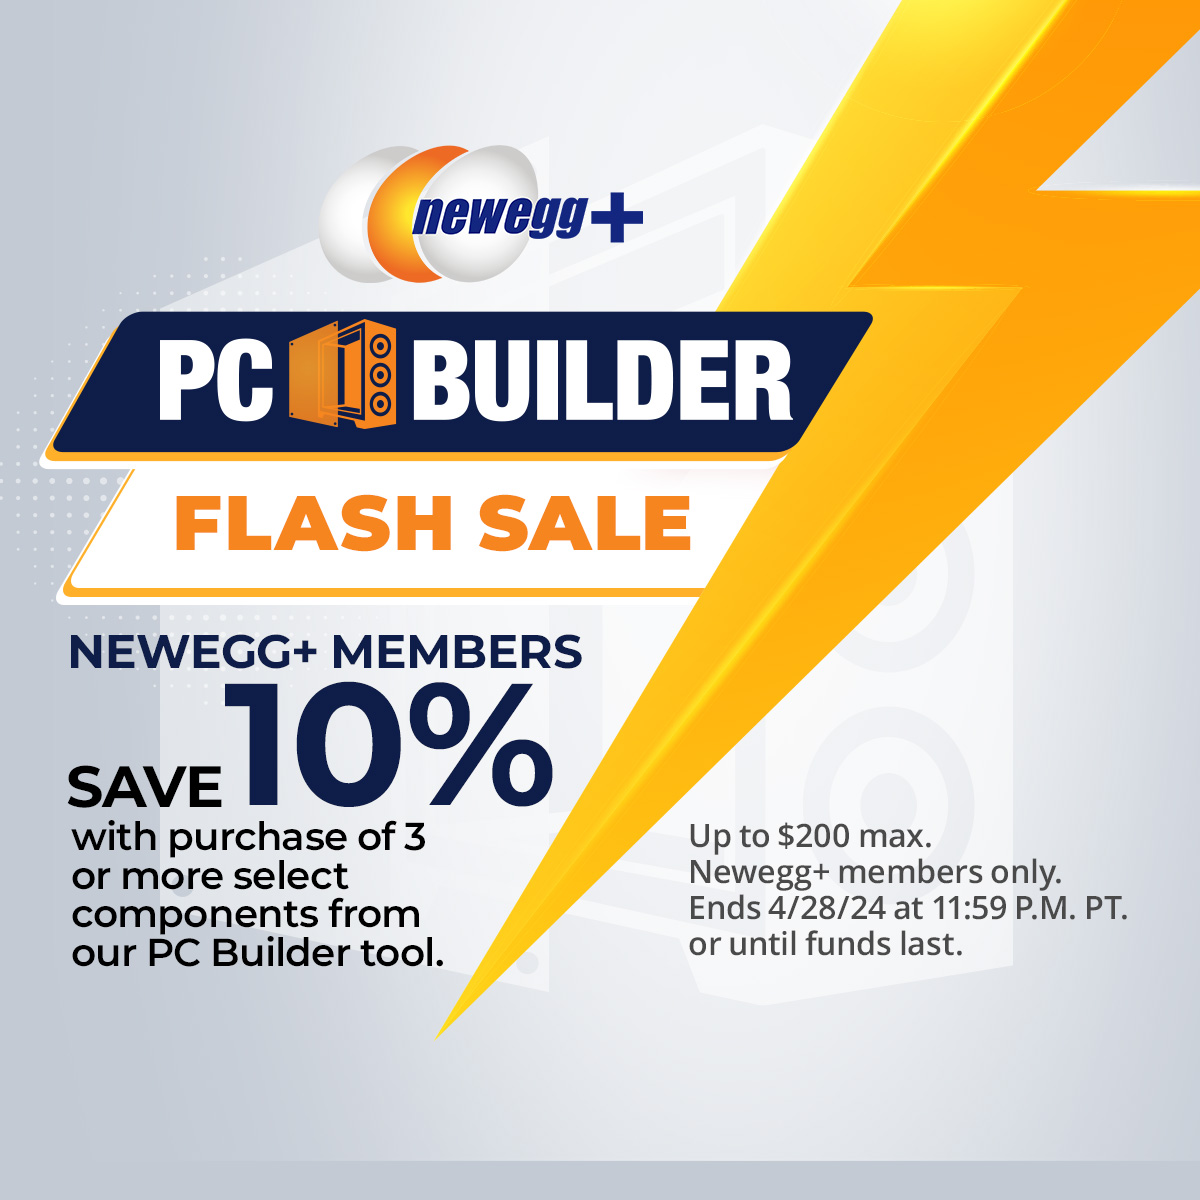 Missed our last PC Builder Flash Sale? 😡Don't trip! Here's another chance to complete your latest build! 🛒SHOP NOW👉newegg.io/pcbuilder0426x What parts do you still need to complete your build? #pcbuid #pcgaming #pcsetup #techdeals